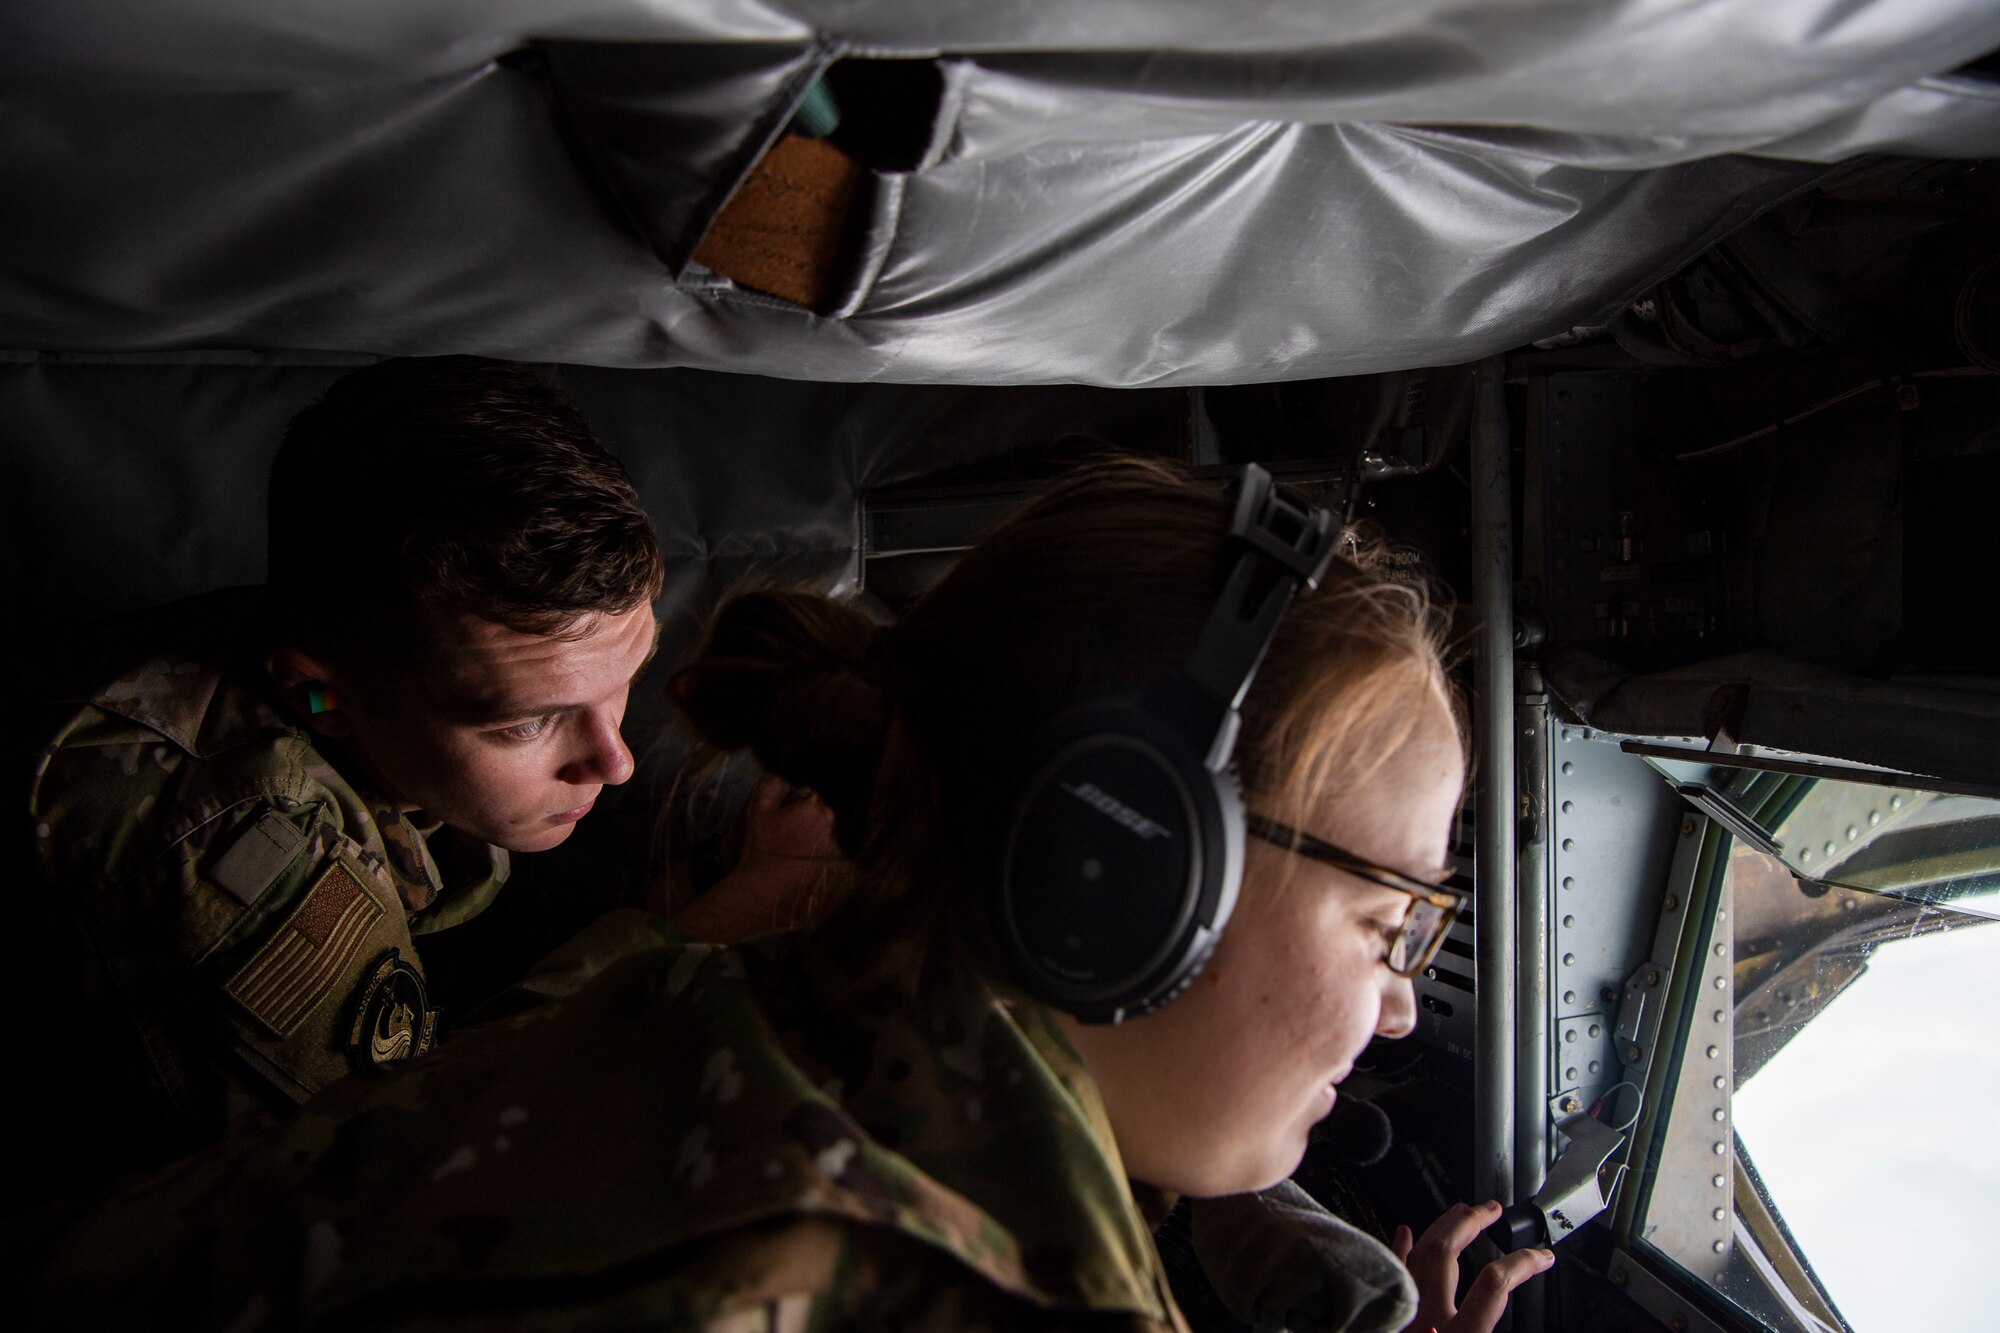 A cadet with Air Force ROTC Detachment 159 at the University of Central Florida observes Airman 1st Class Mackenzie Rodgers, a boom operator assigned to the 91st Air Refueling Squadron, prepare to refuel an aircraft over Texas, April 11, 2022.